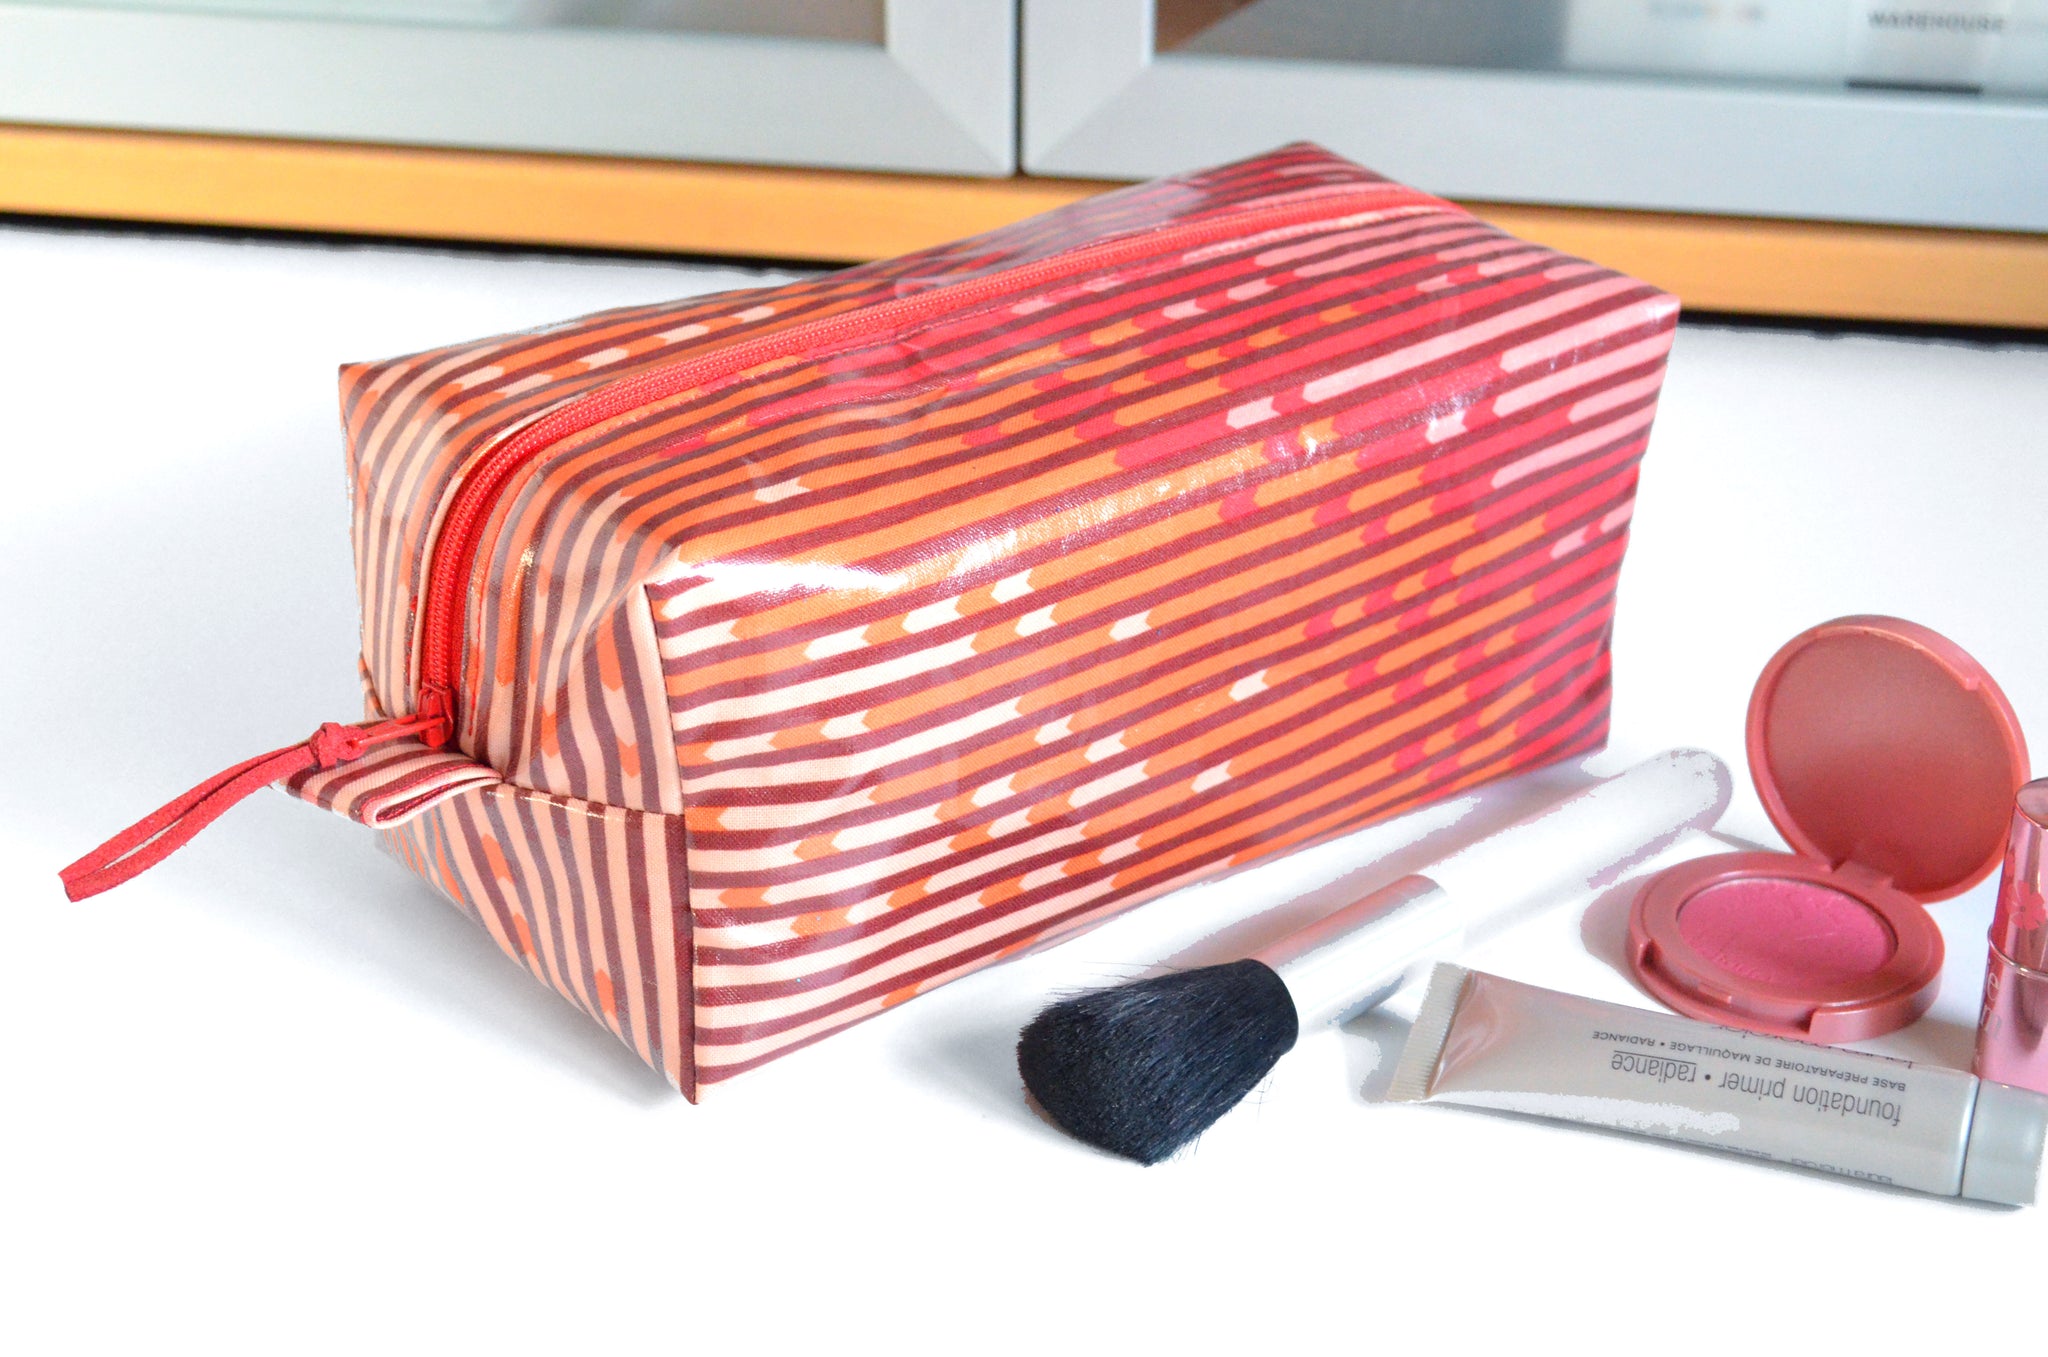 Red Saltwater Laminated Toiletry Bag